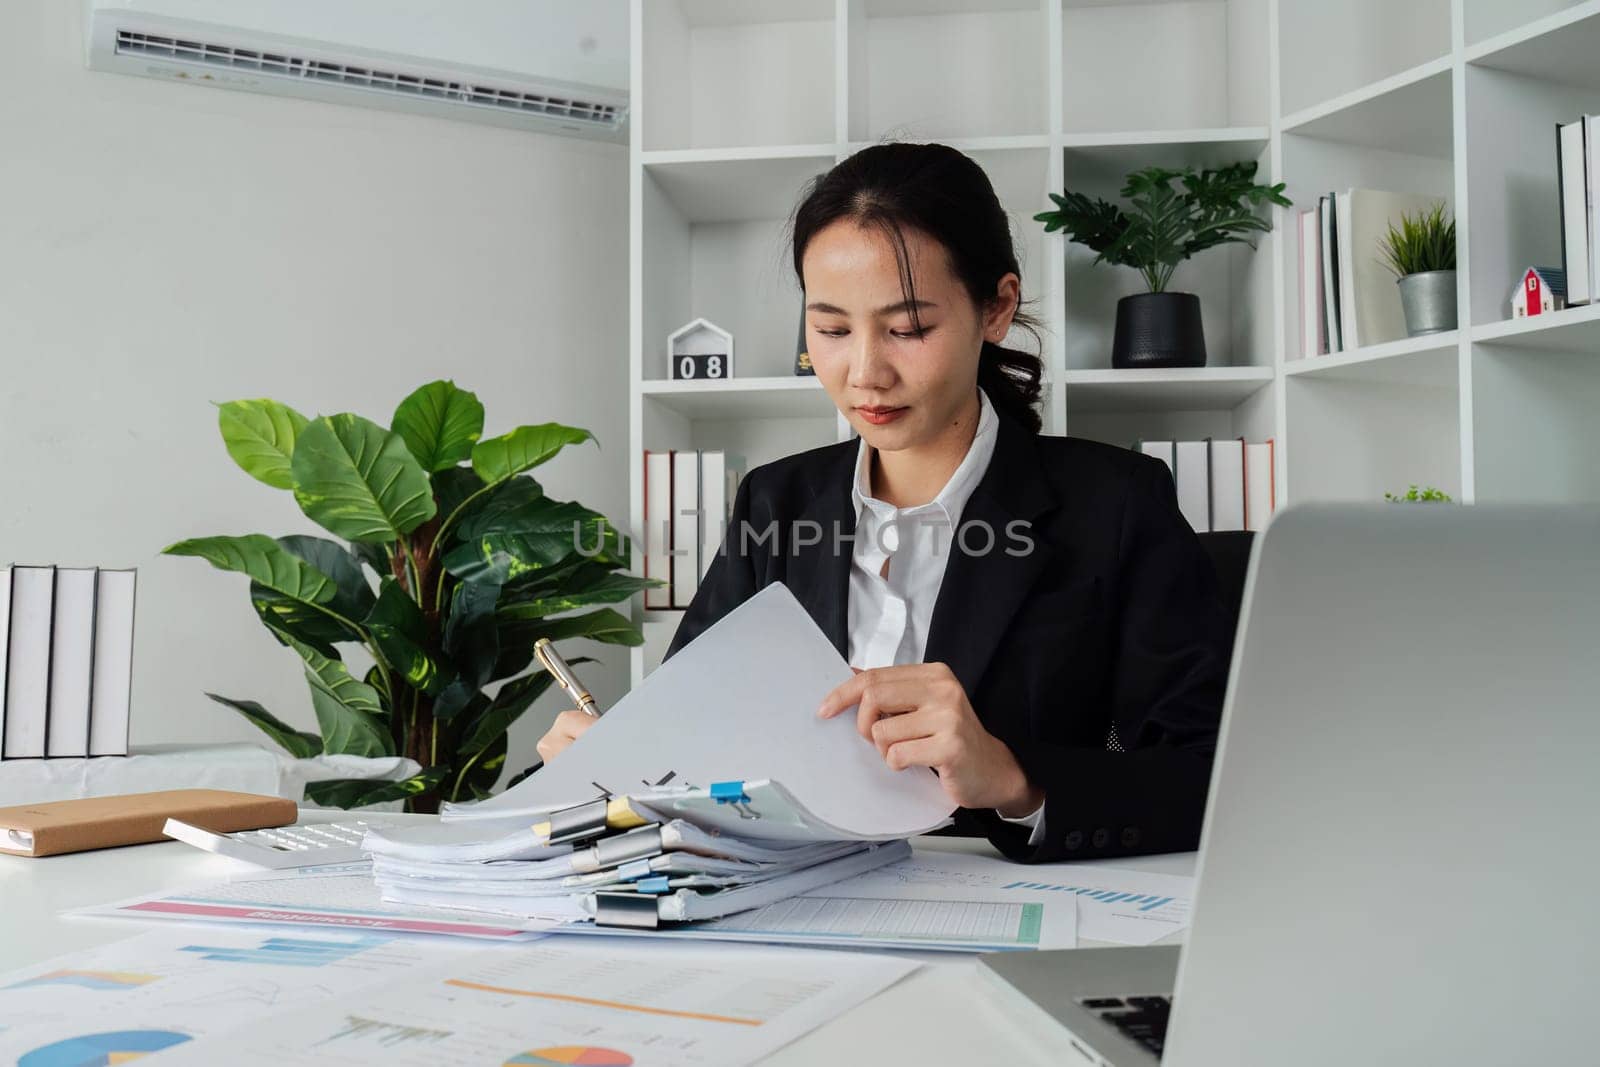 Accountant working on financial data analysis dashboard on paper as marketing indication for business strategic planning by itchaznong